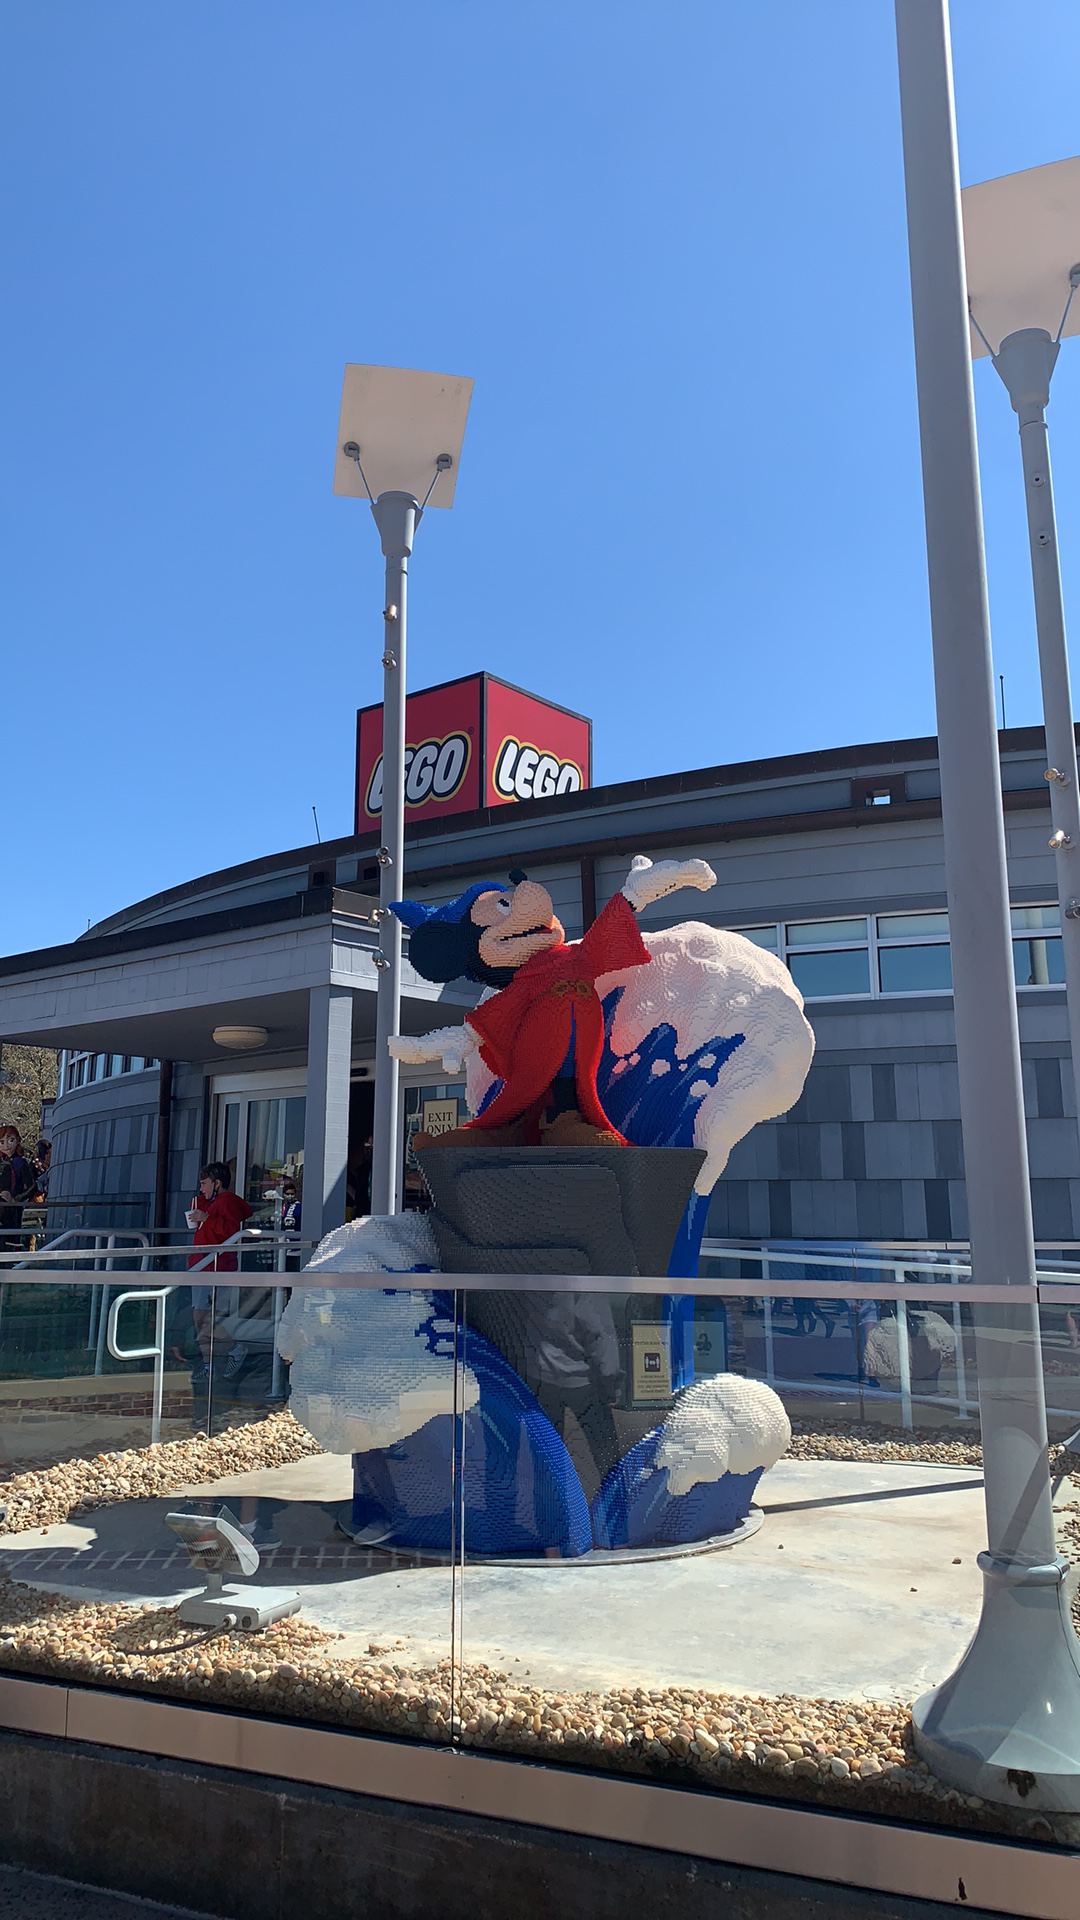 New Sorcerer Mickey Lego display now appearing at Disney Springs!